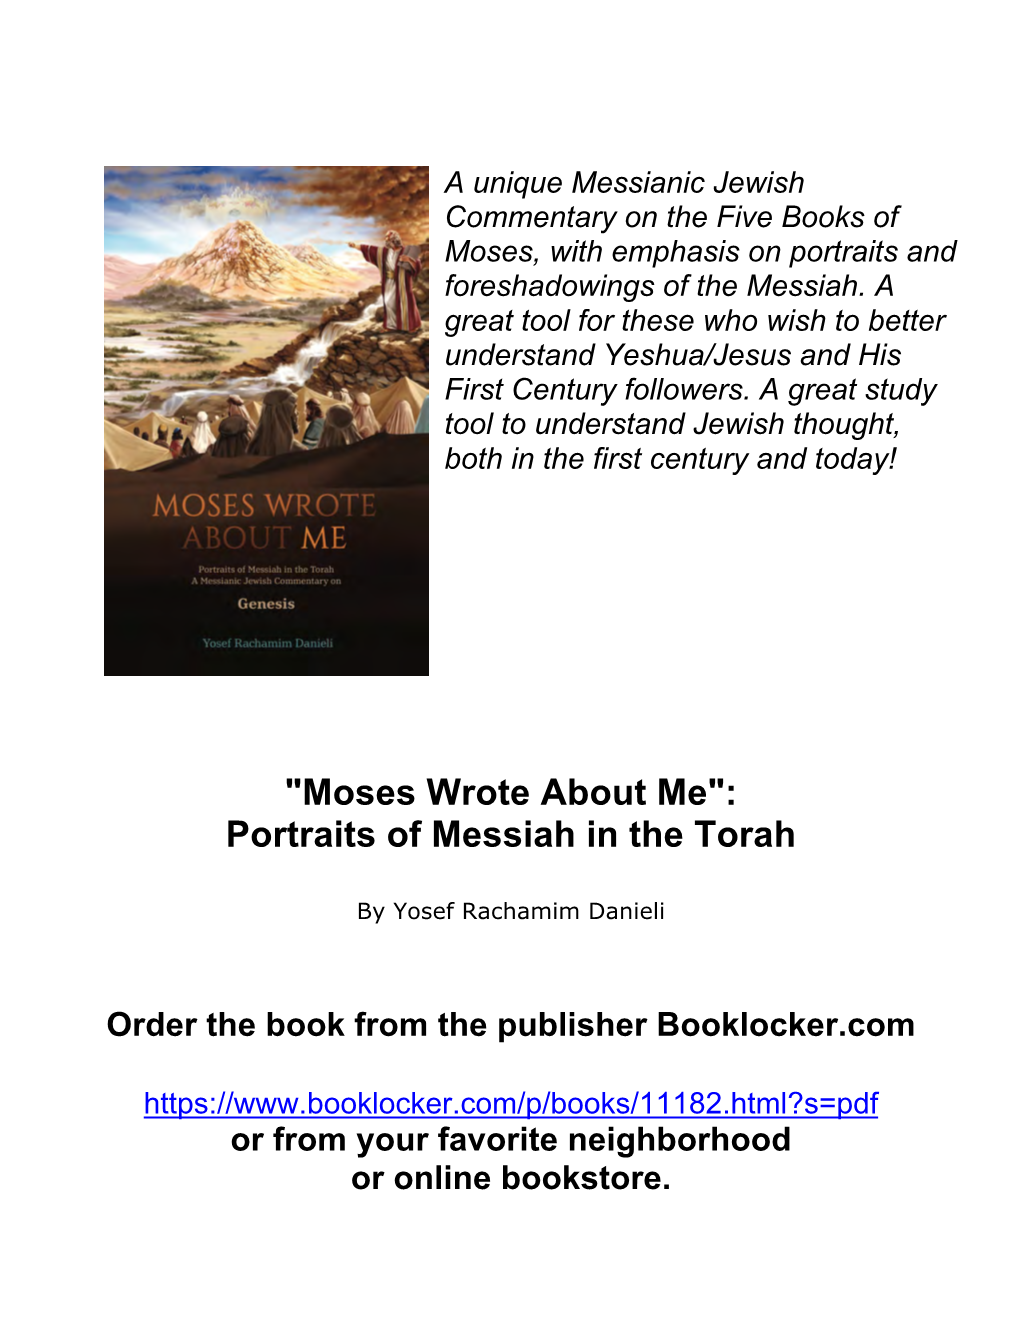 Moses Wrote About Me": Portraits of Messiah in the Torah